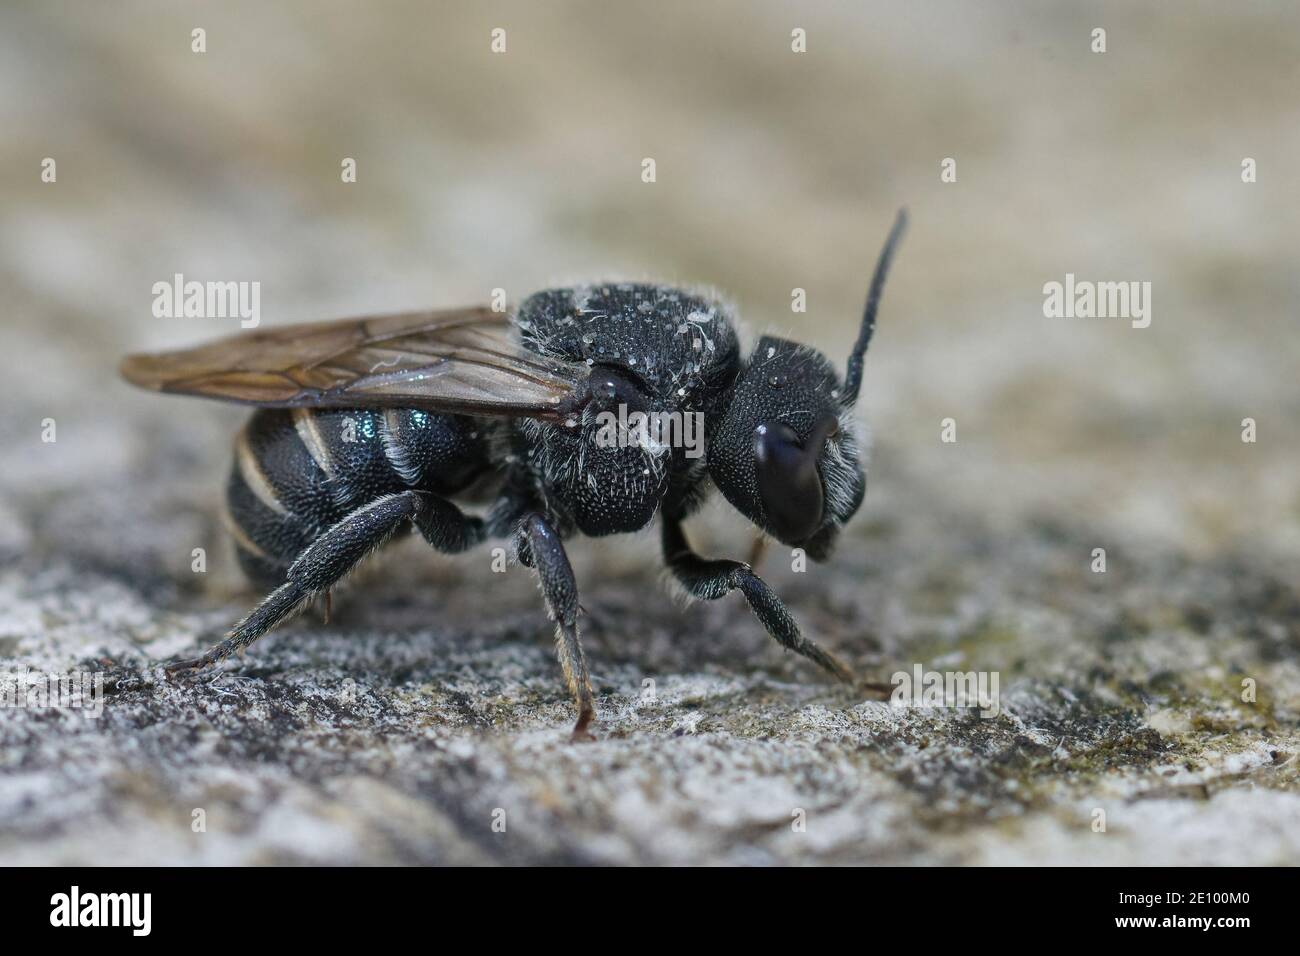 A close up of a Banded Dark Bee ( Stelis punctulatissima ) which is a cleptoparasite on Carder bees ( Anthidium ). Location : Gard, France Stock Photo